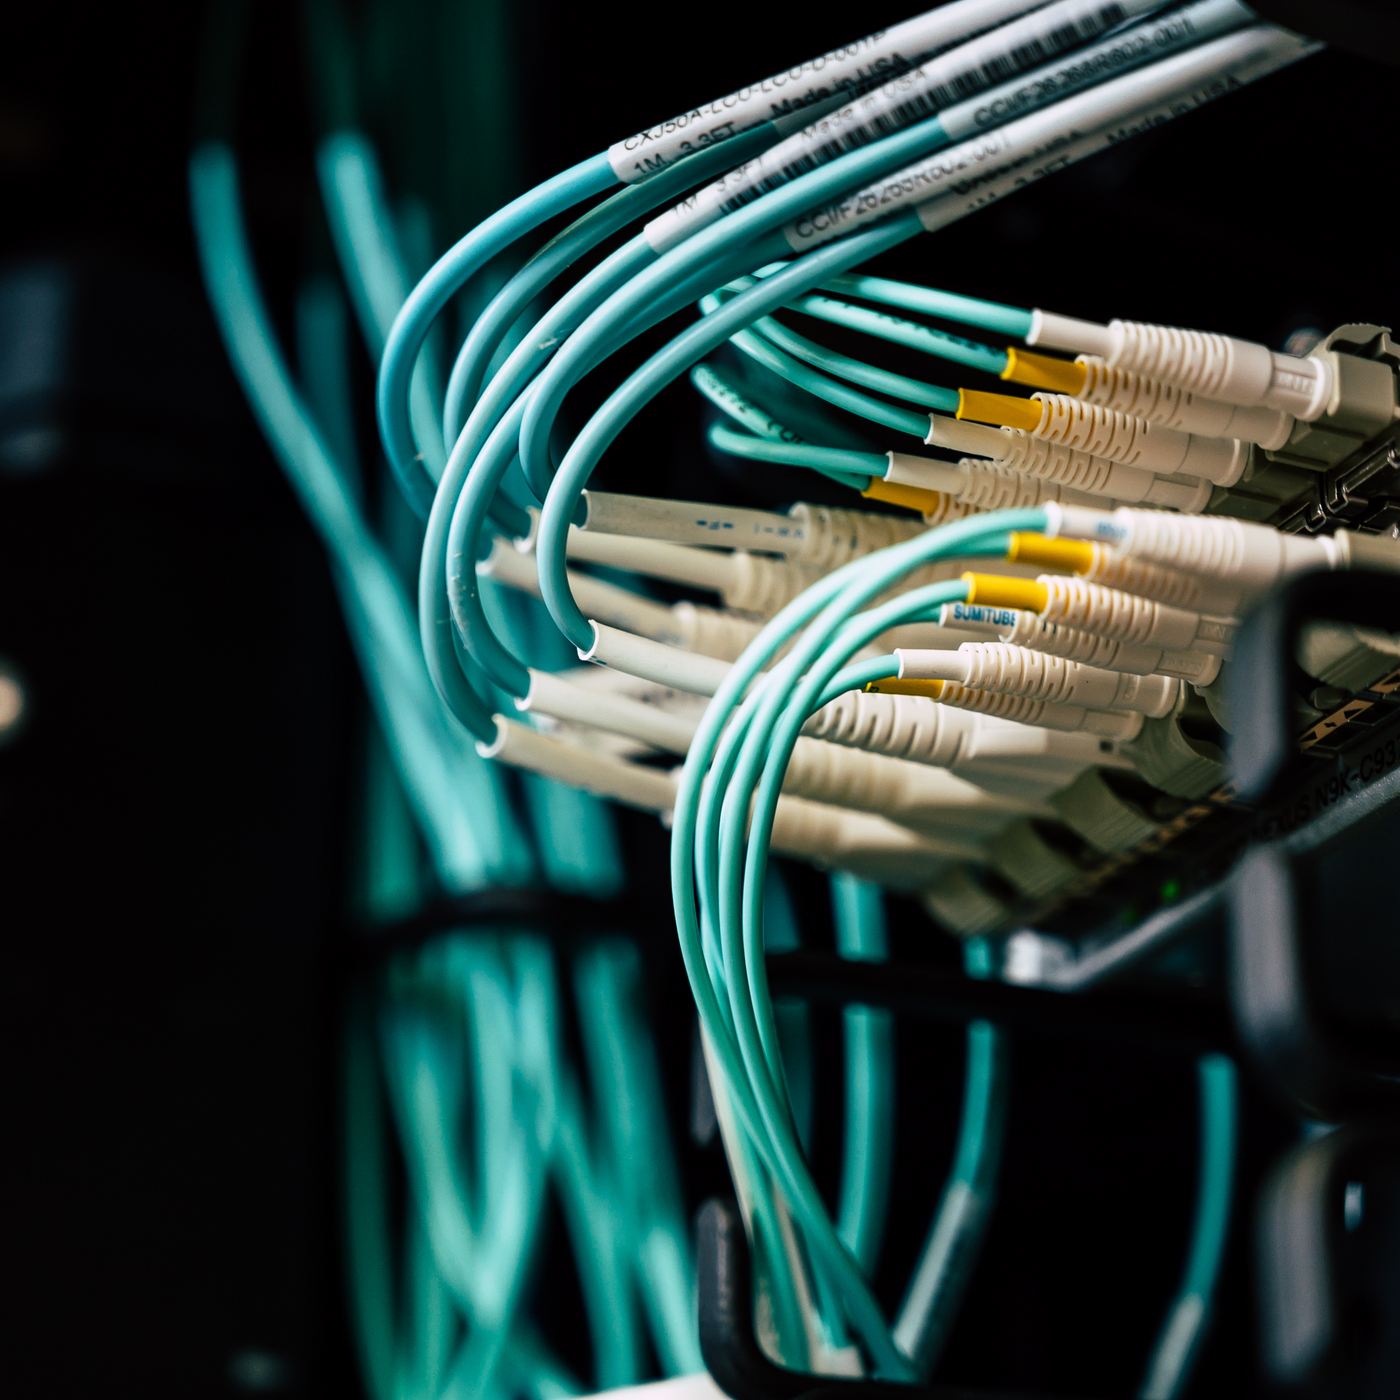 Structured Cabling System 101